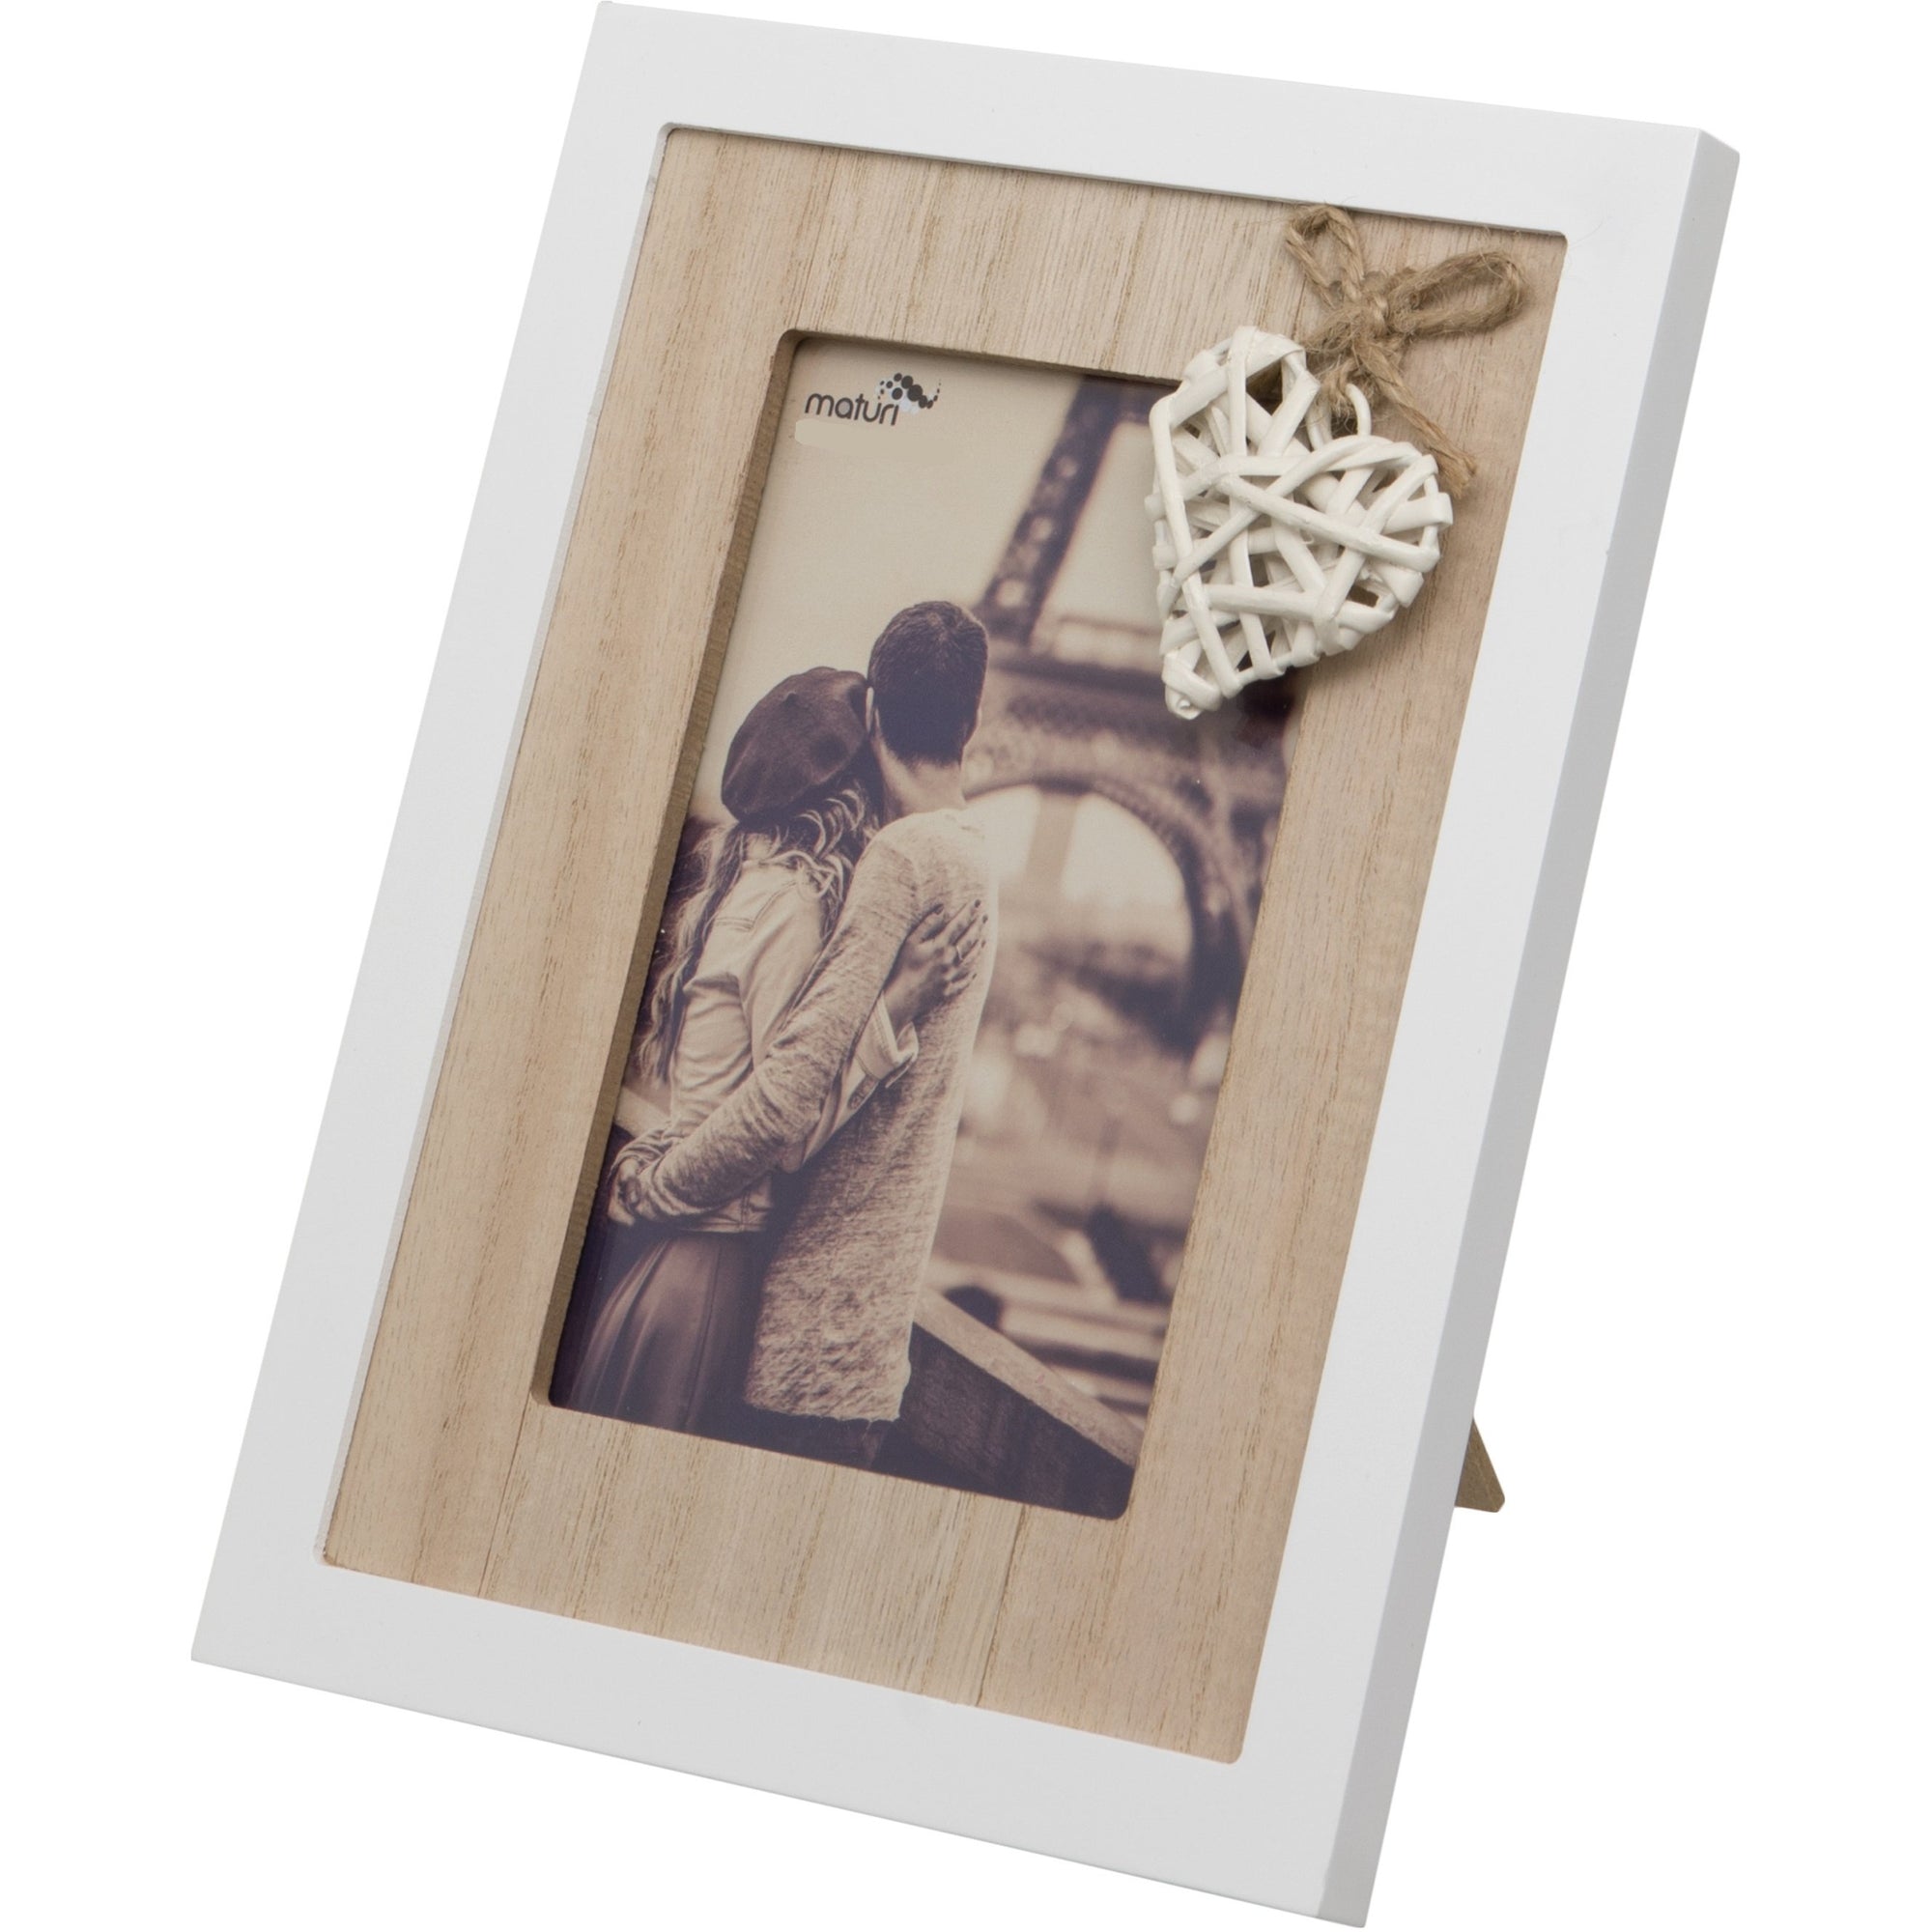 Woven Heart Wooden Photo Frame 8 x 10-Inch